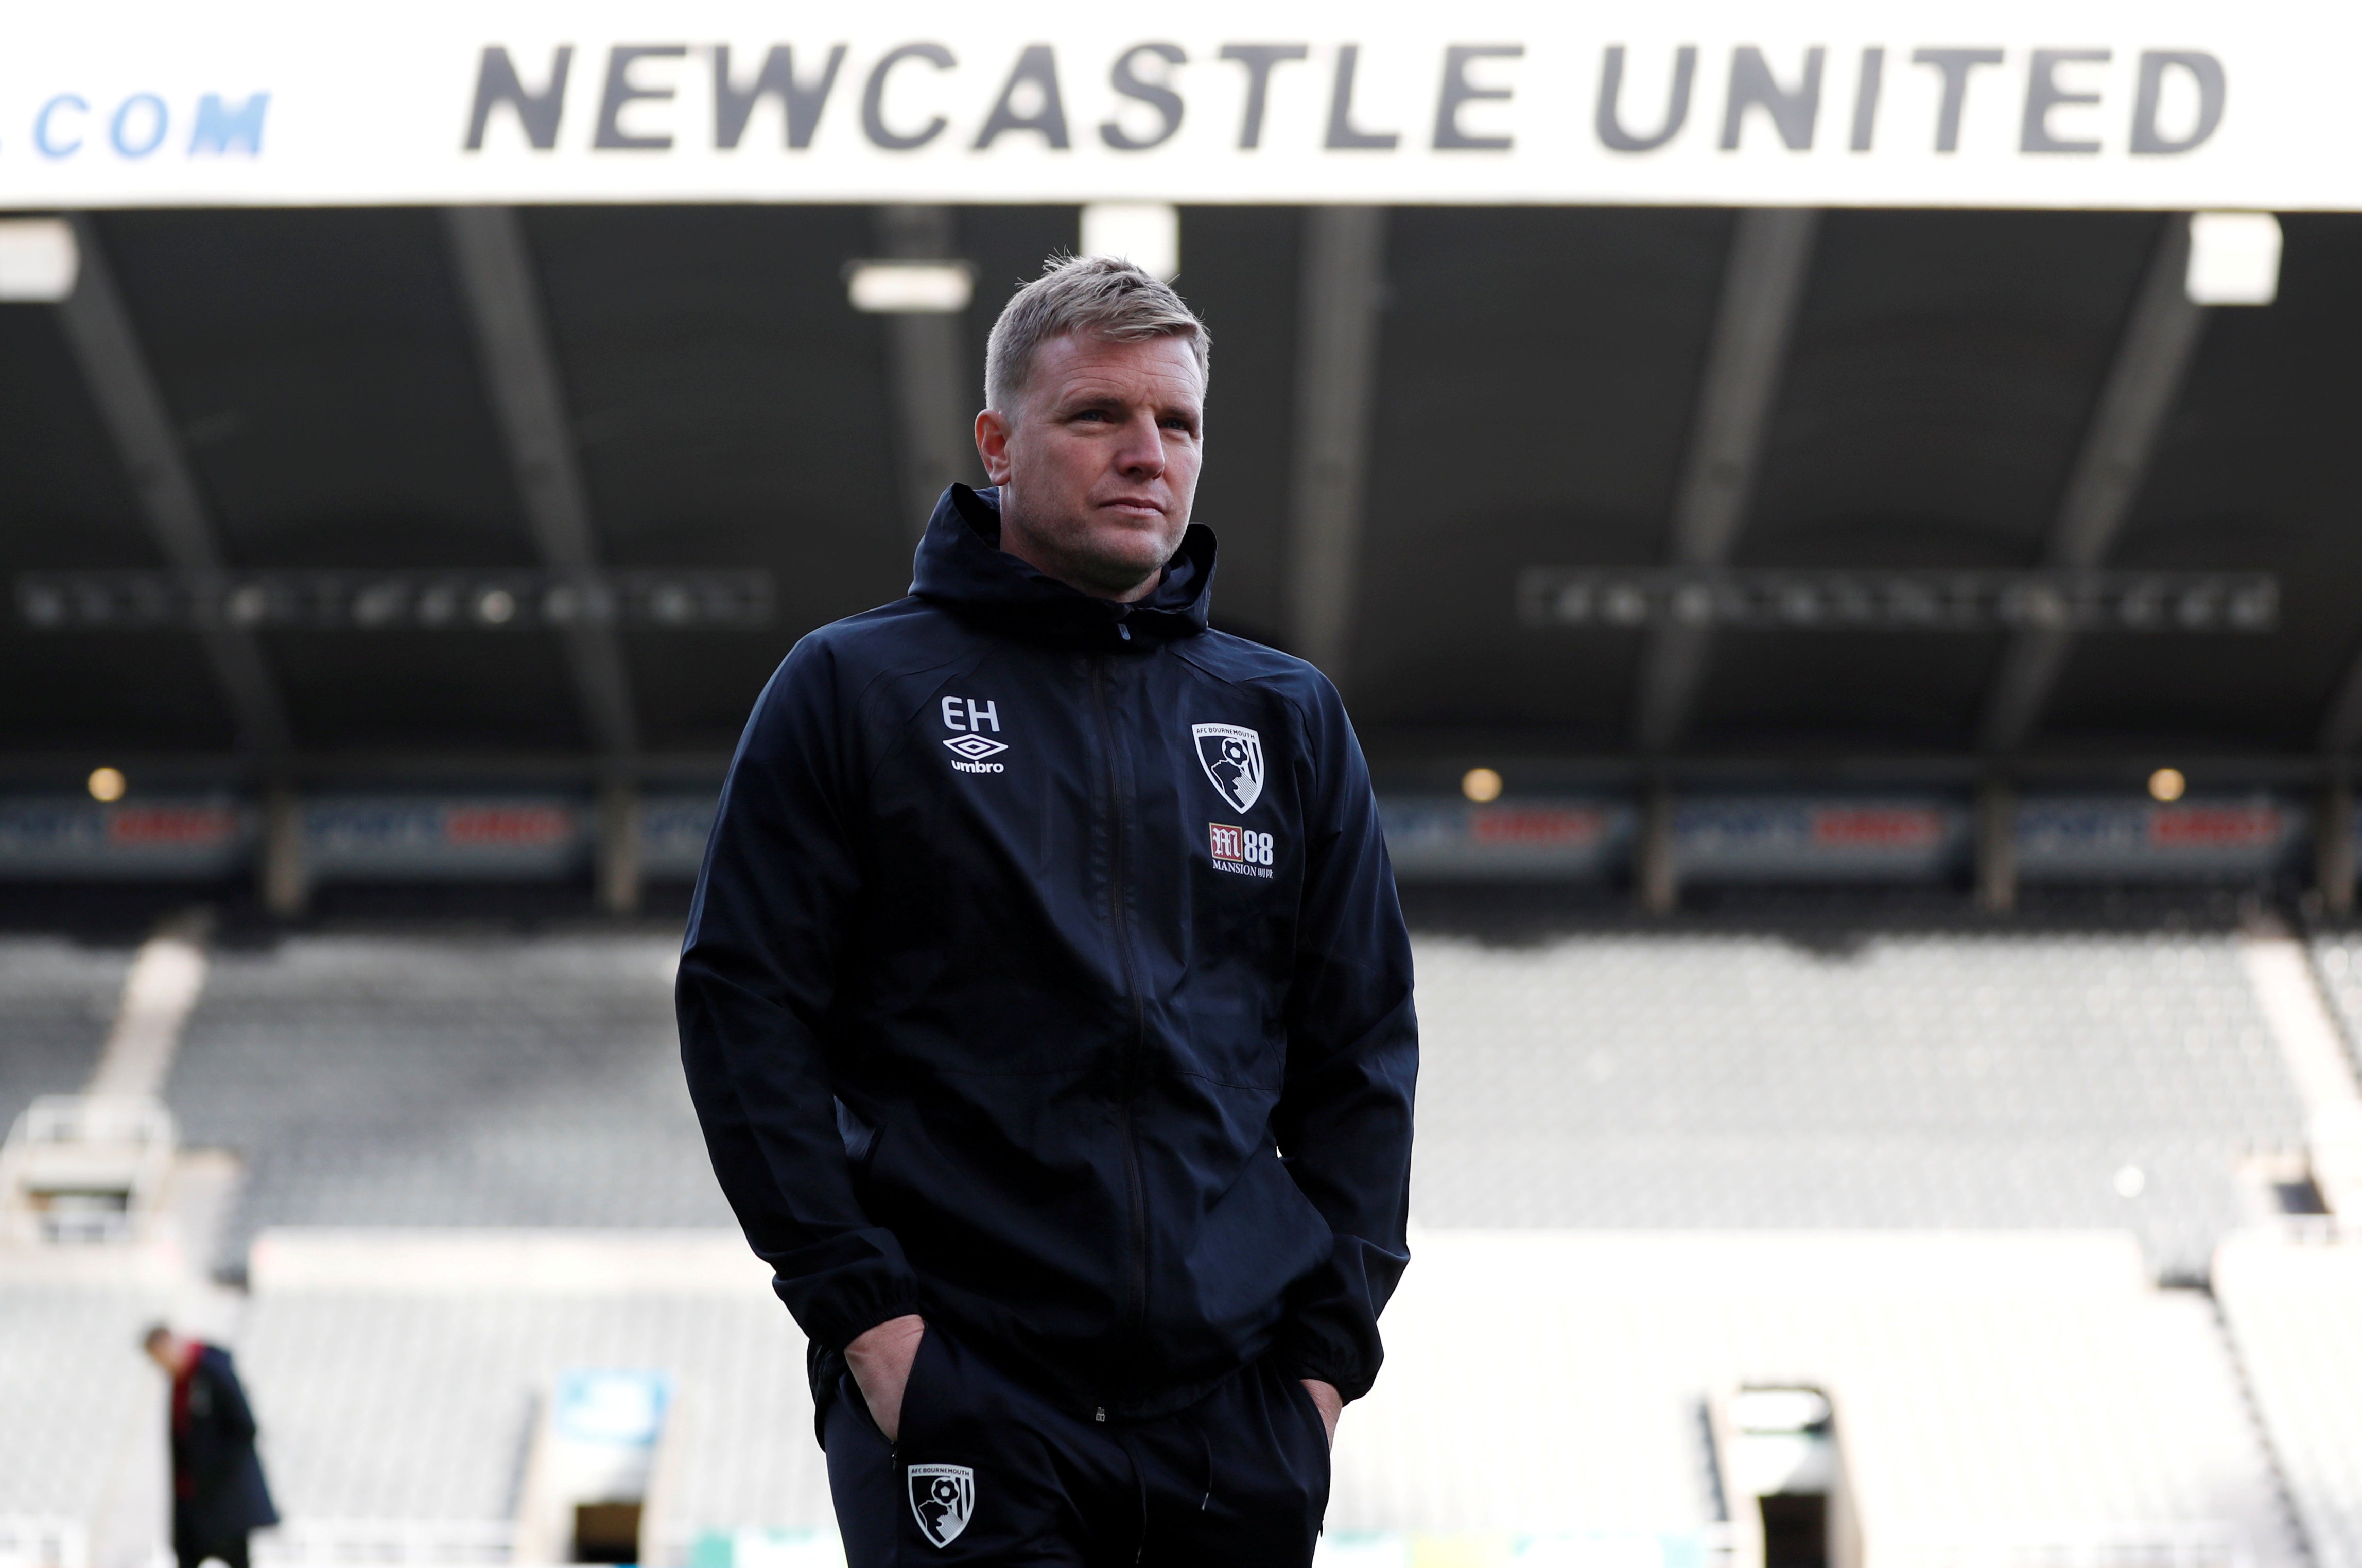 Eddie Howe is the new man in the dugout at St James’ Park